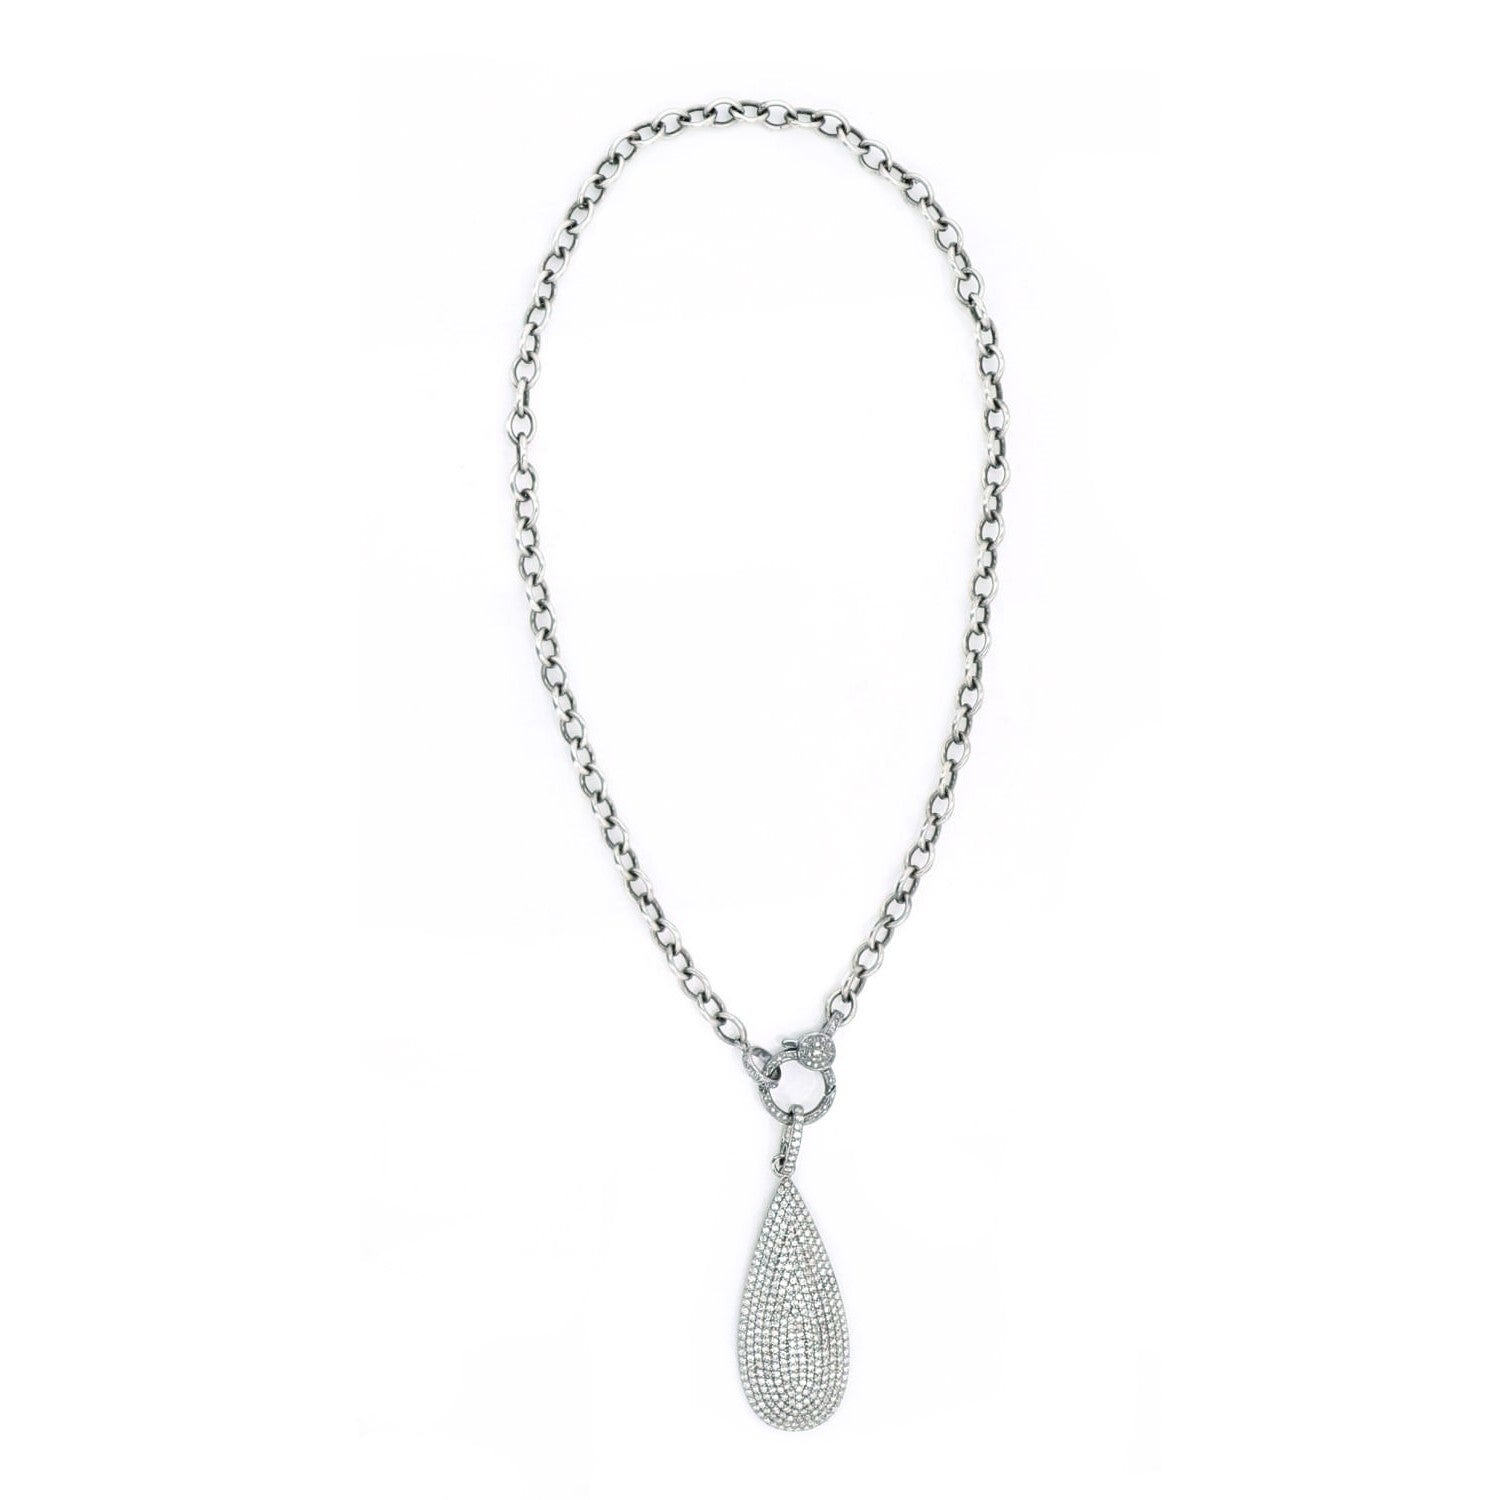 Pave Diamond Teardrop Pendant On Cable Chain Necklace - 17"  N0003043 - TBird